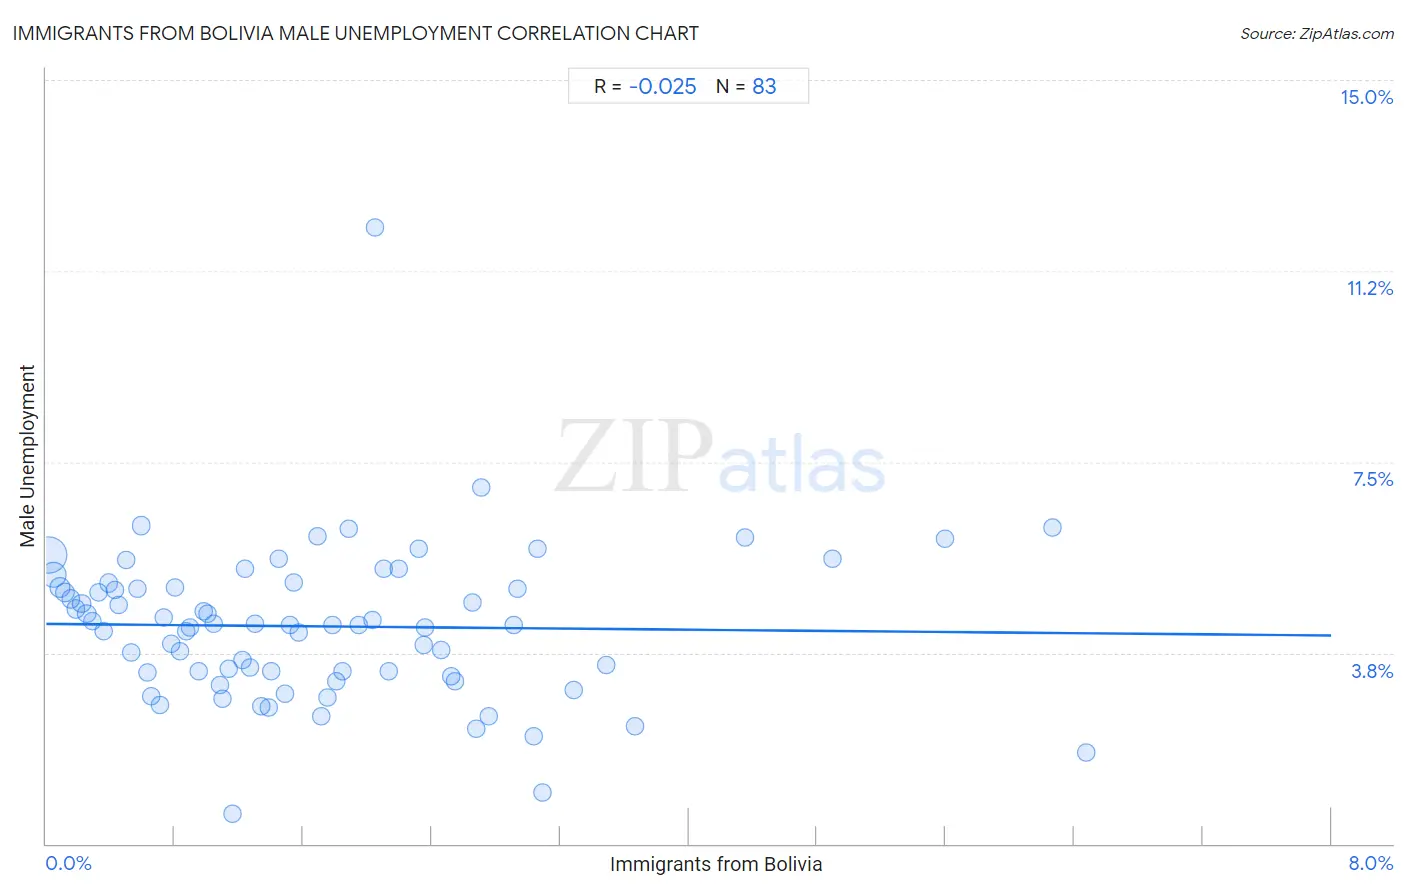 Immigrants from Bolivia Male Unemployment